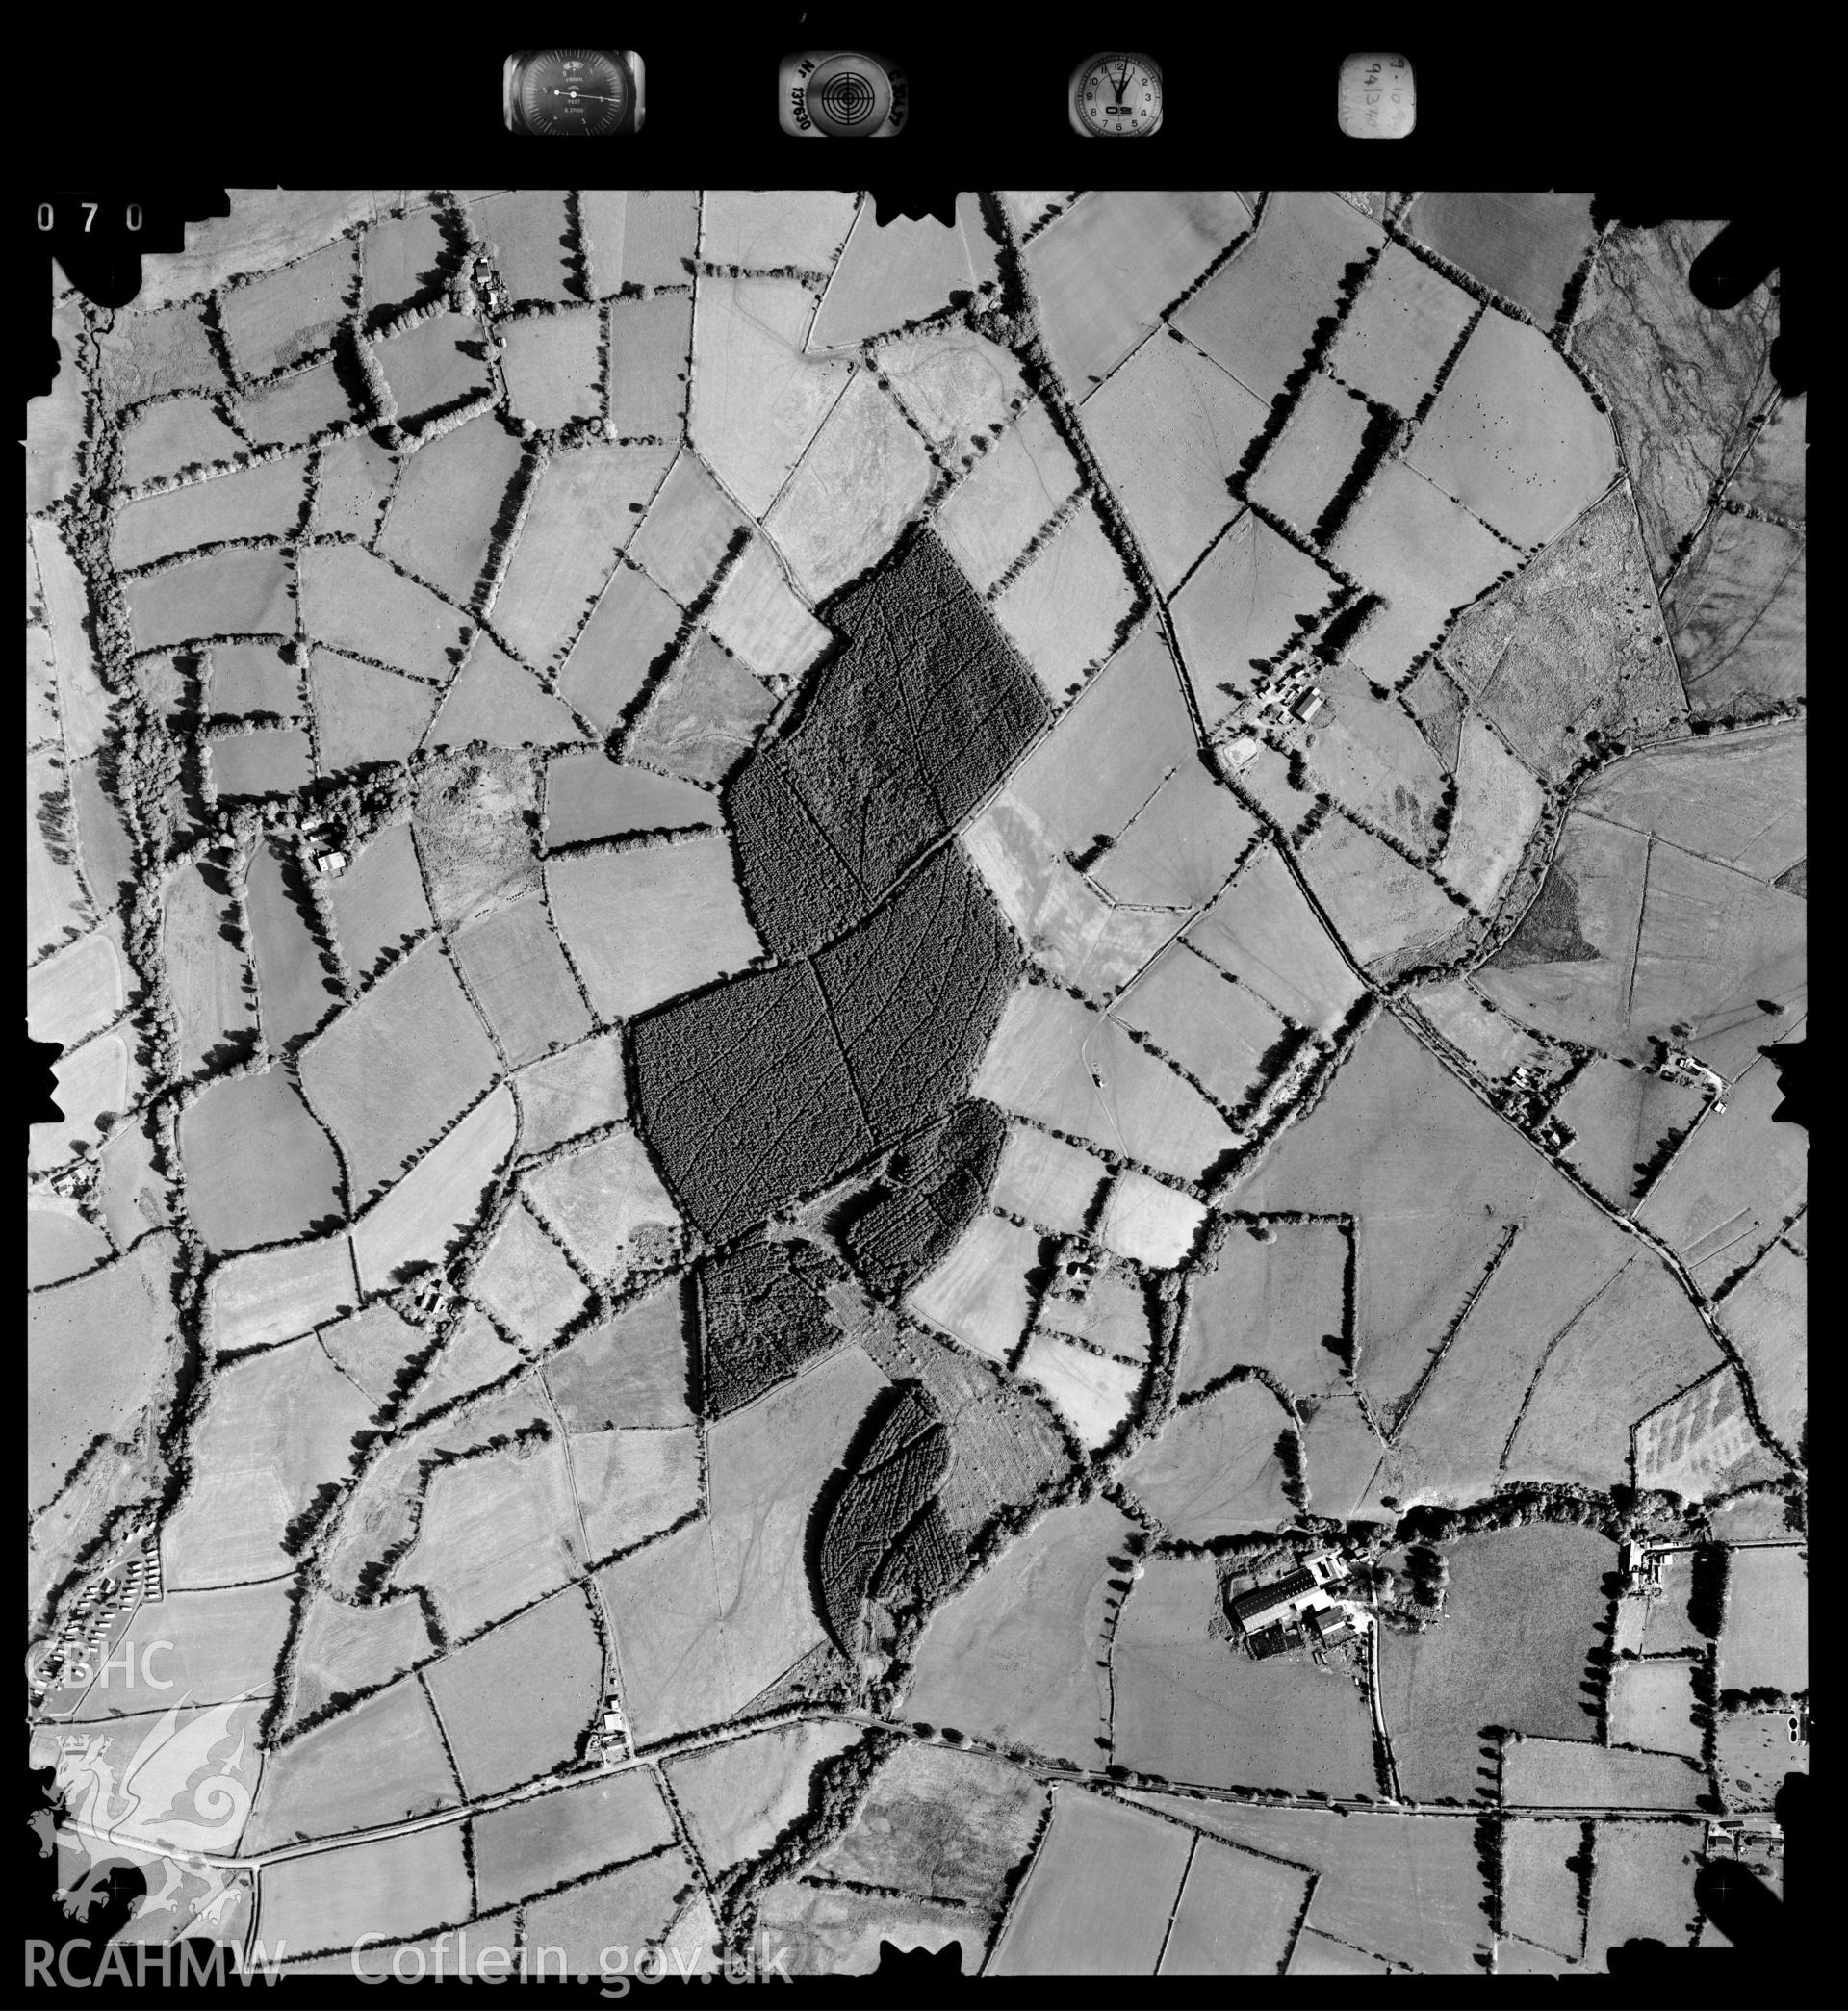 Digitized copy of an aerial photograph showing Cilcennin area, Ceredigion, taken by Ordnance Survey, 1994.